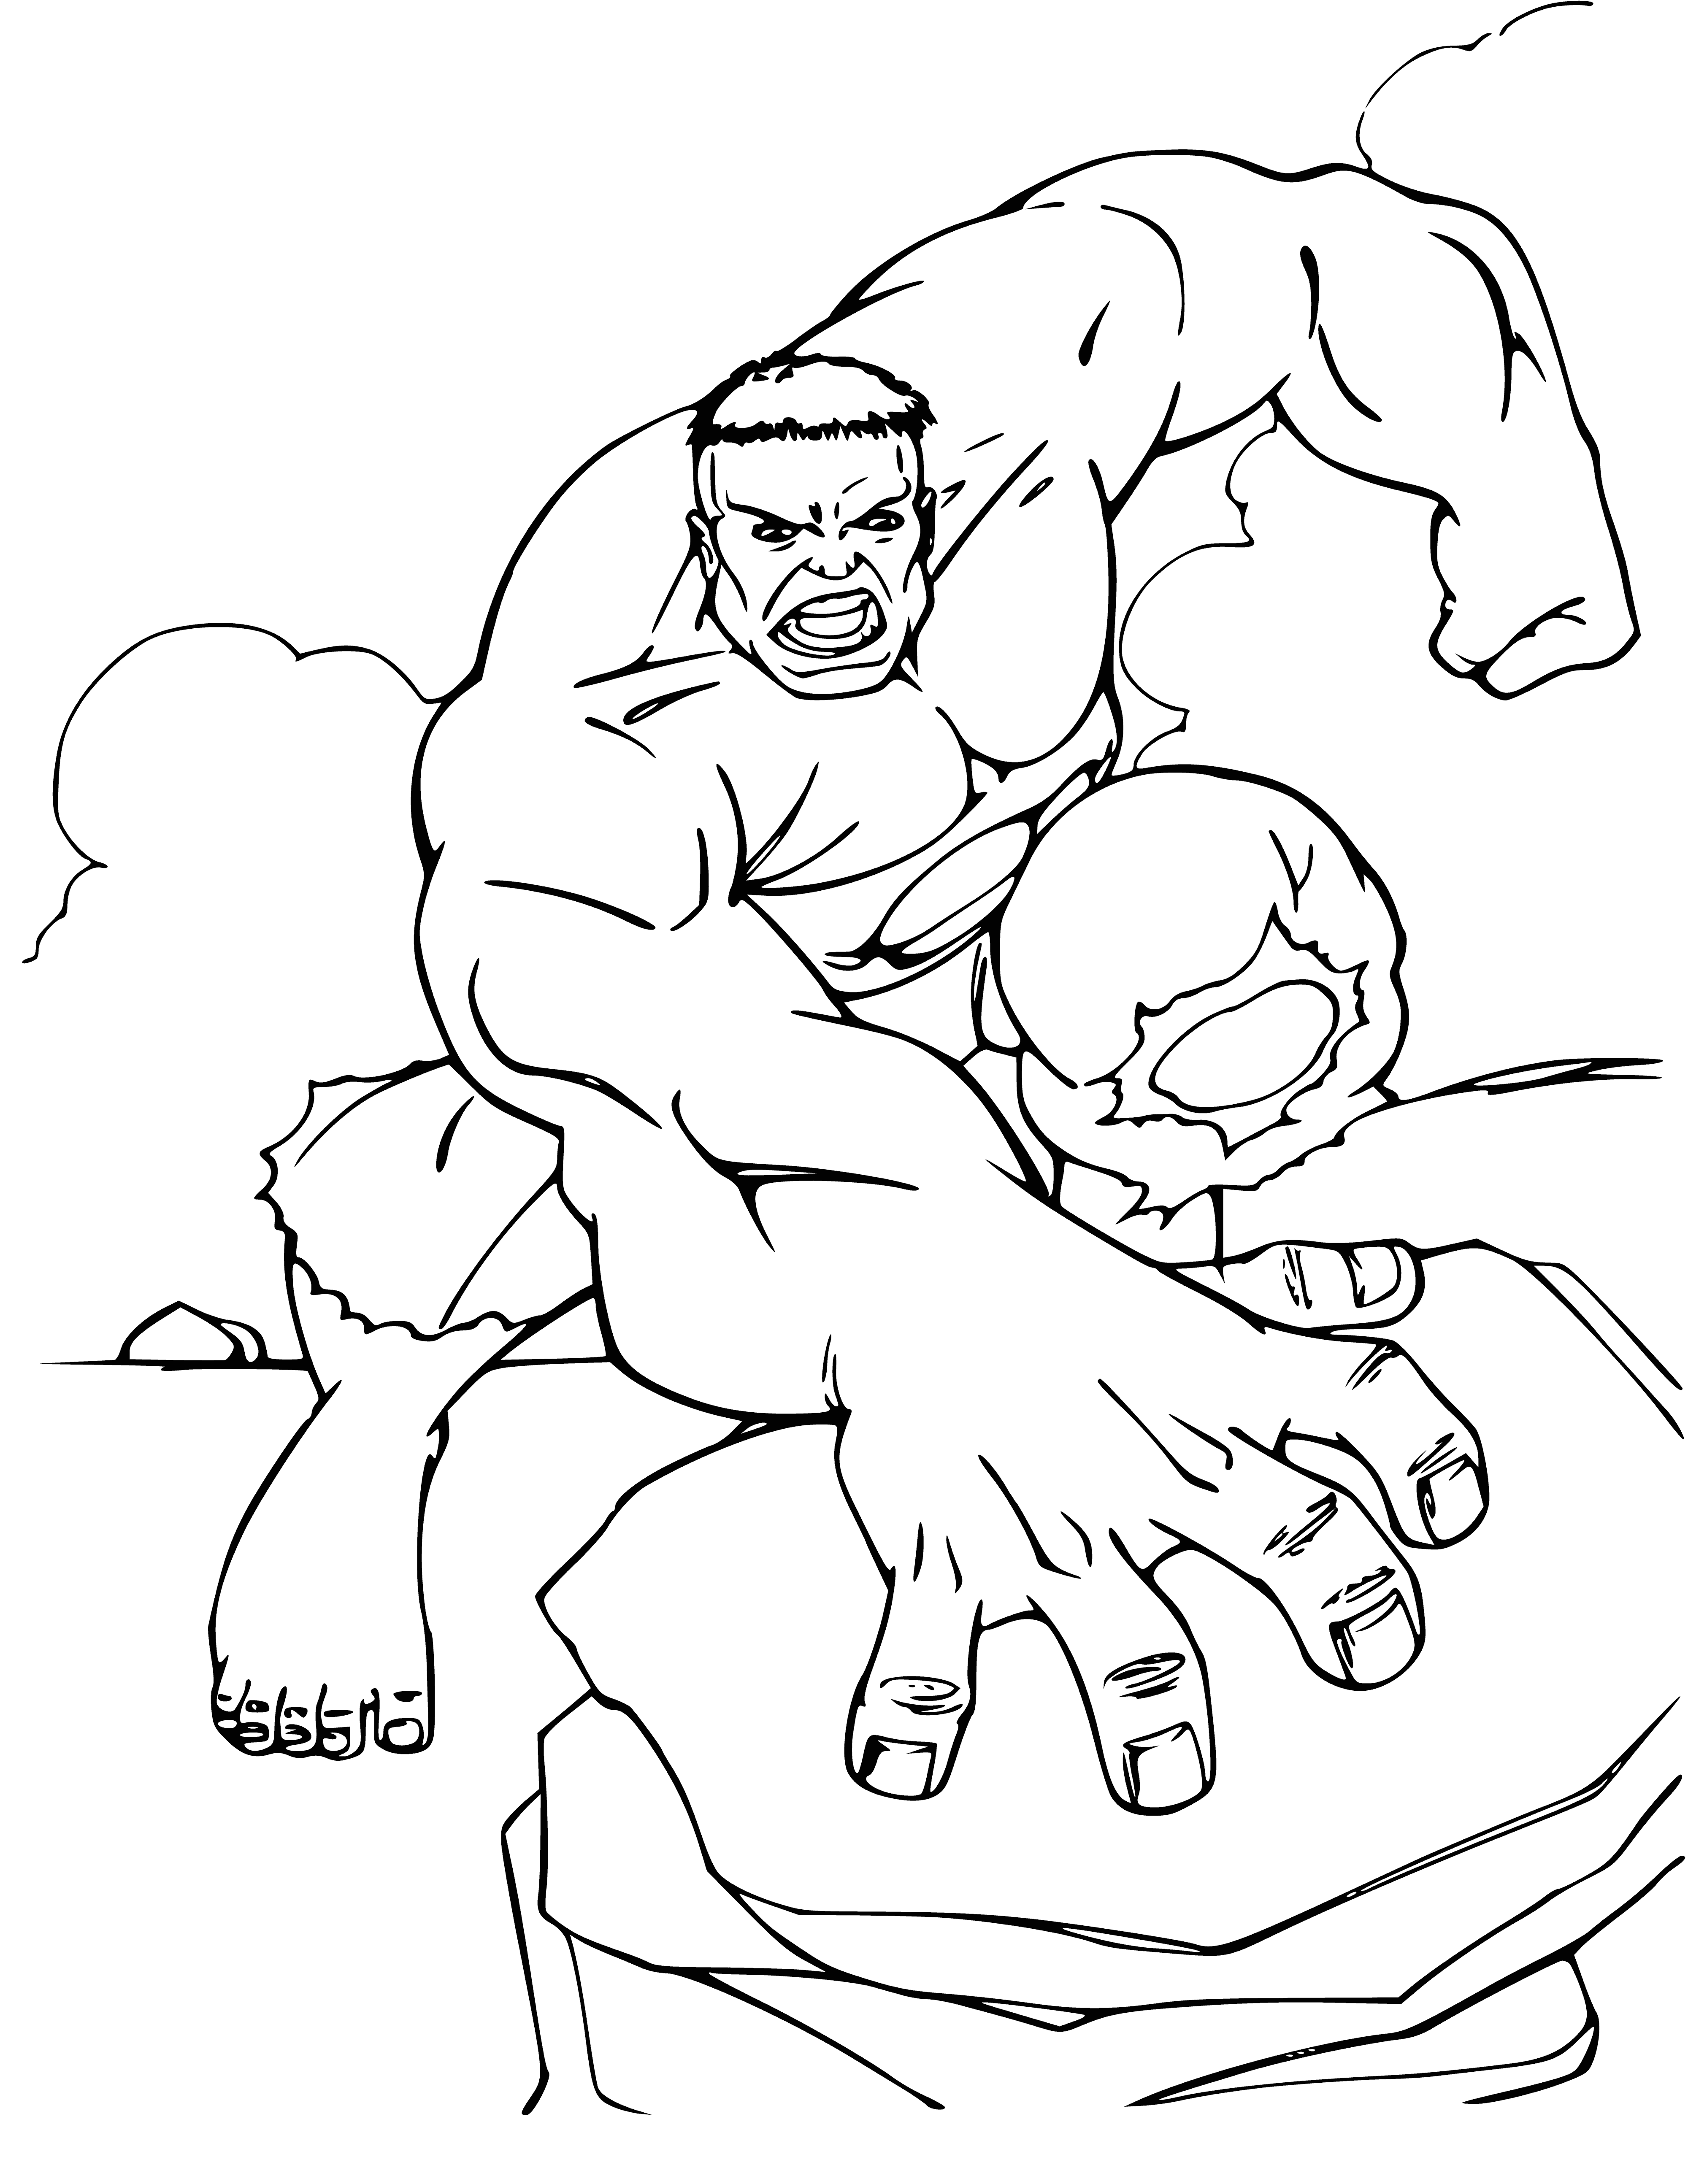 coloring page: Angry green muscleman w/ giant forehead & torn purple pants stands barefoot, glaring fiercely.